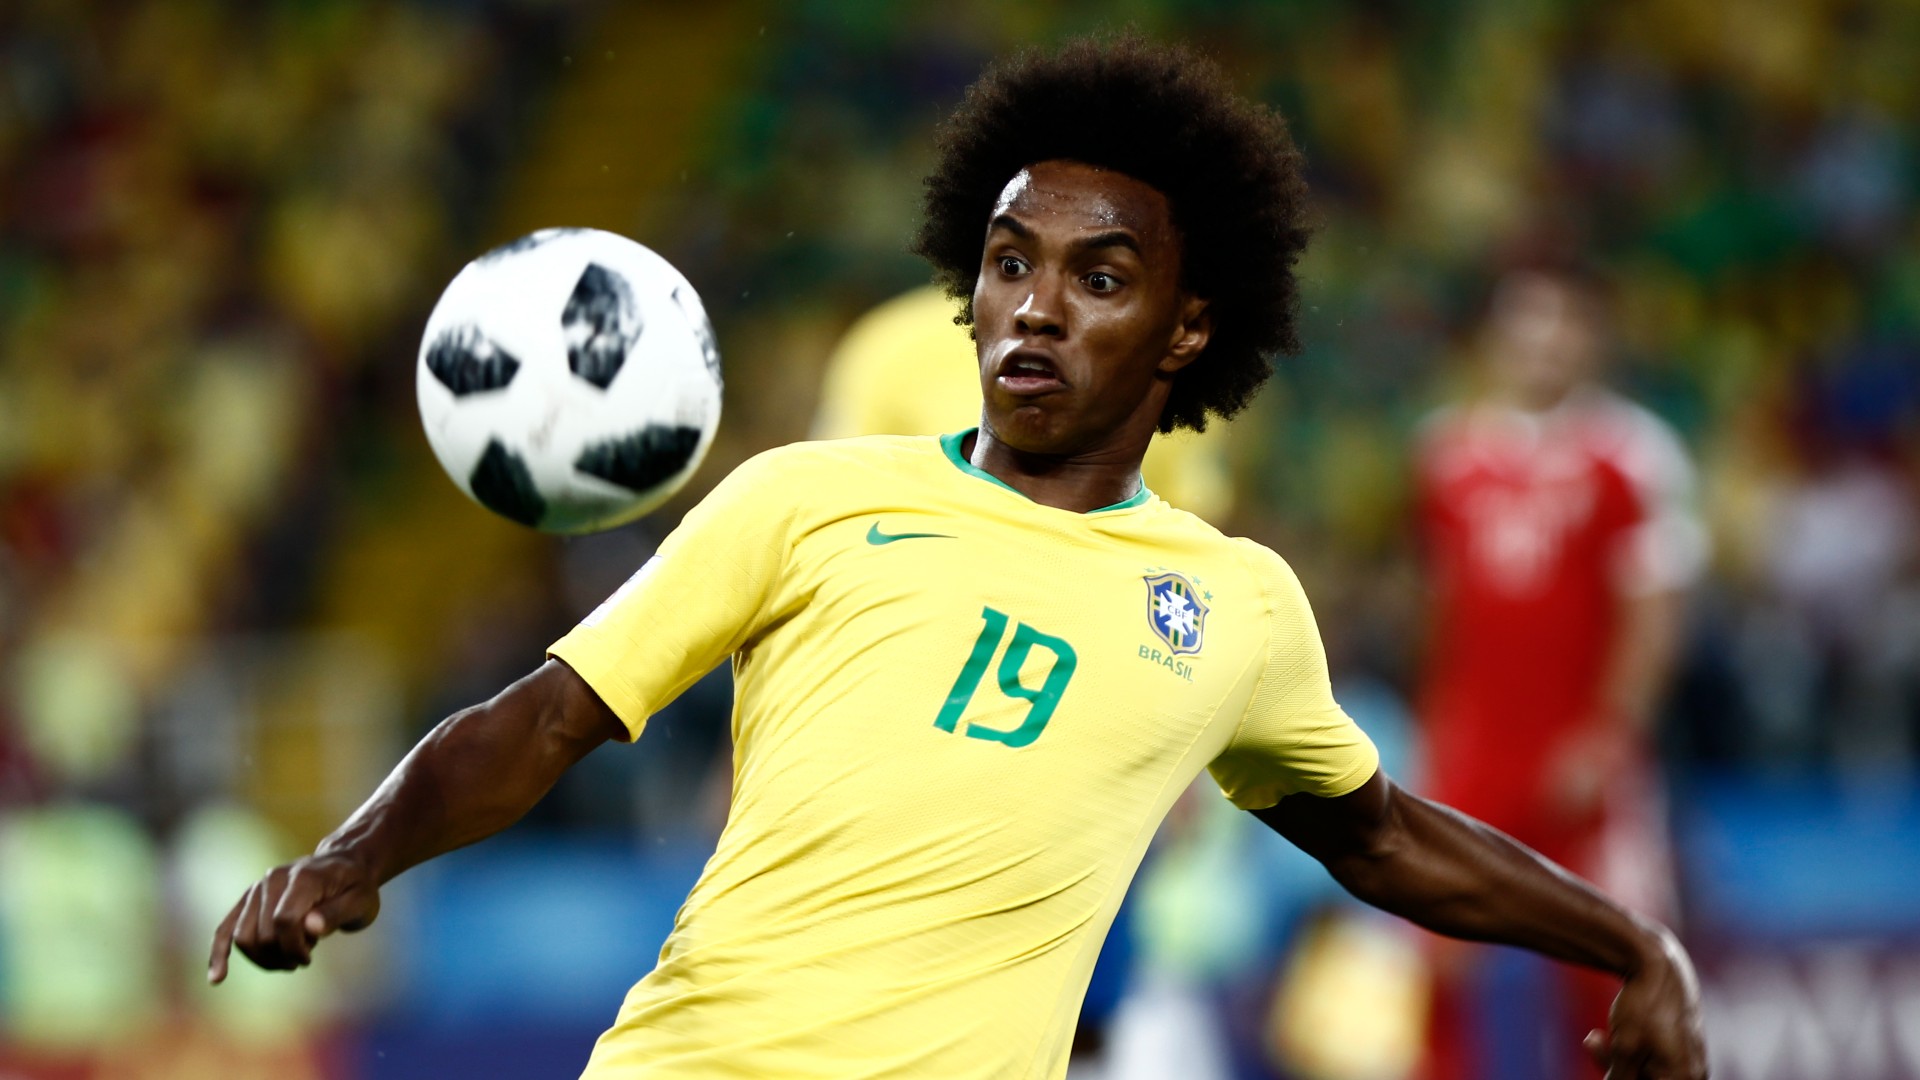 Brazil in transition, says Willian